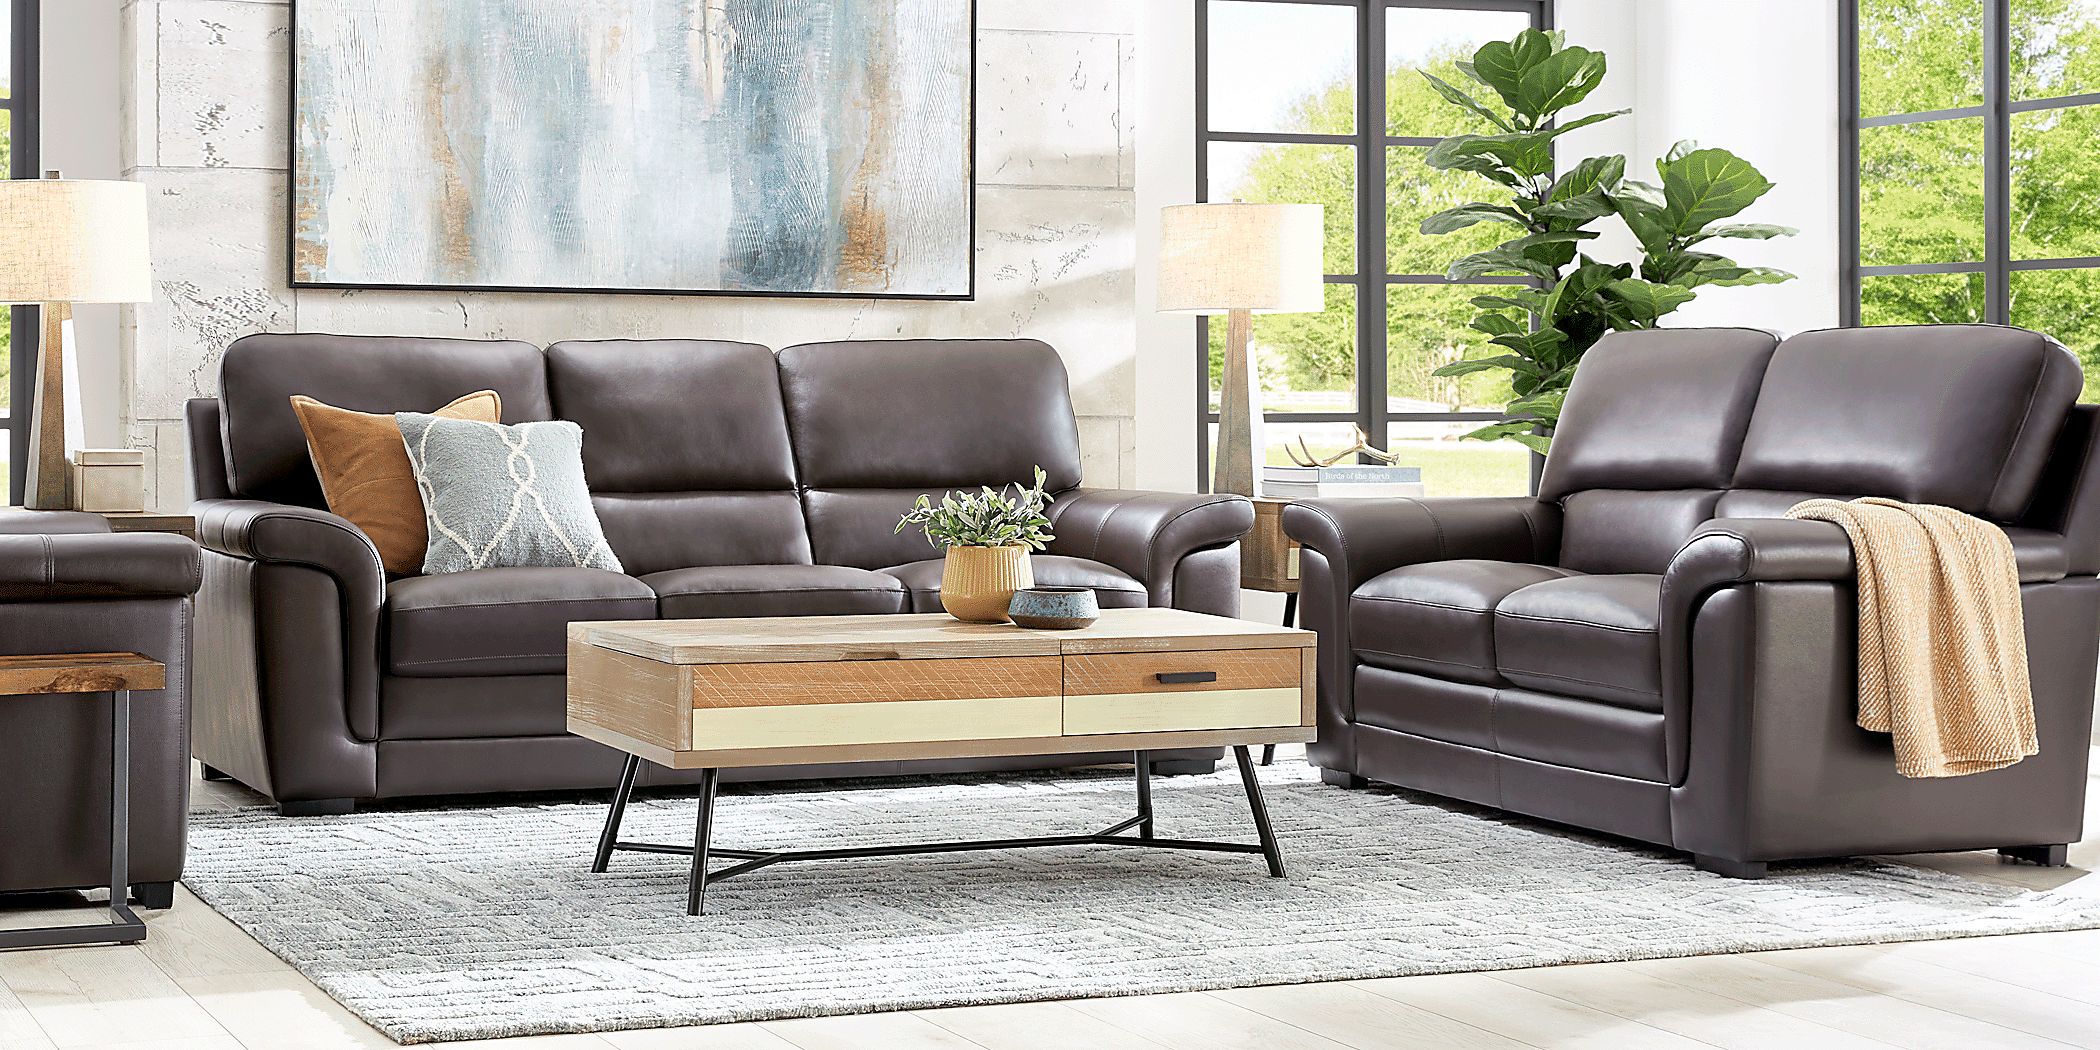 Rooms To Go Ashbury Place Brown Leather 5 Pc Living Room